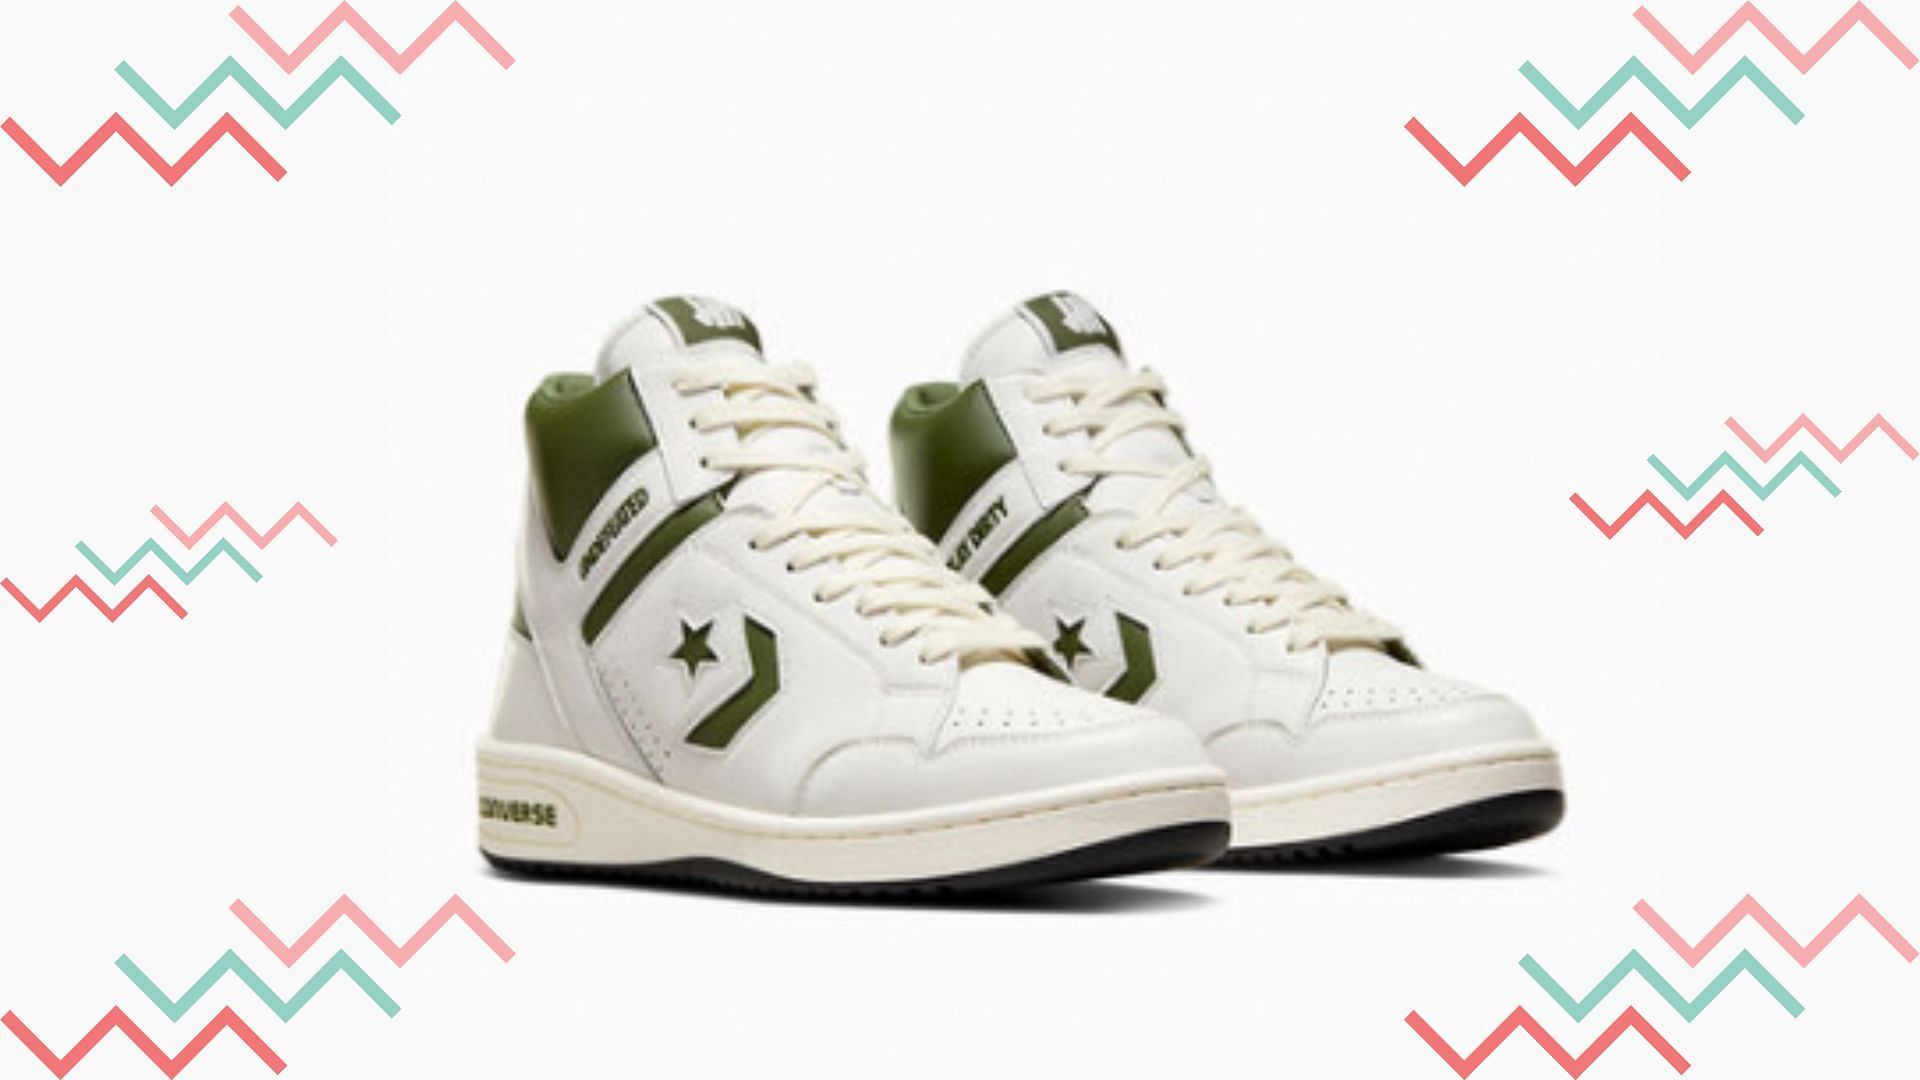 forudsigelse Skibform Modernisering Undefeated: Undefeated x Converse Weapon "White Chive" shoes: Where to get,  price, and more details explored